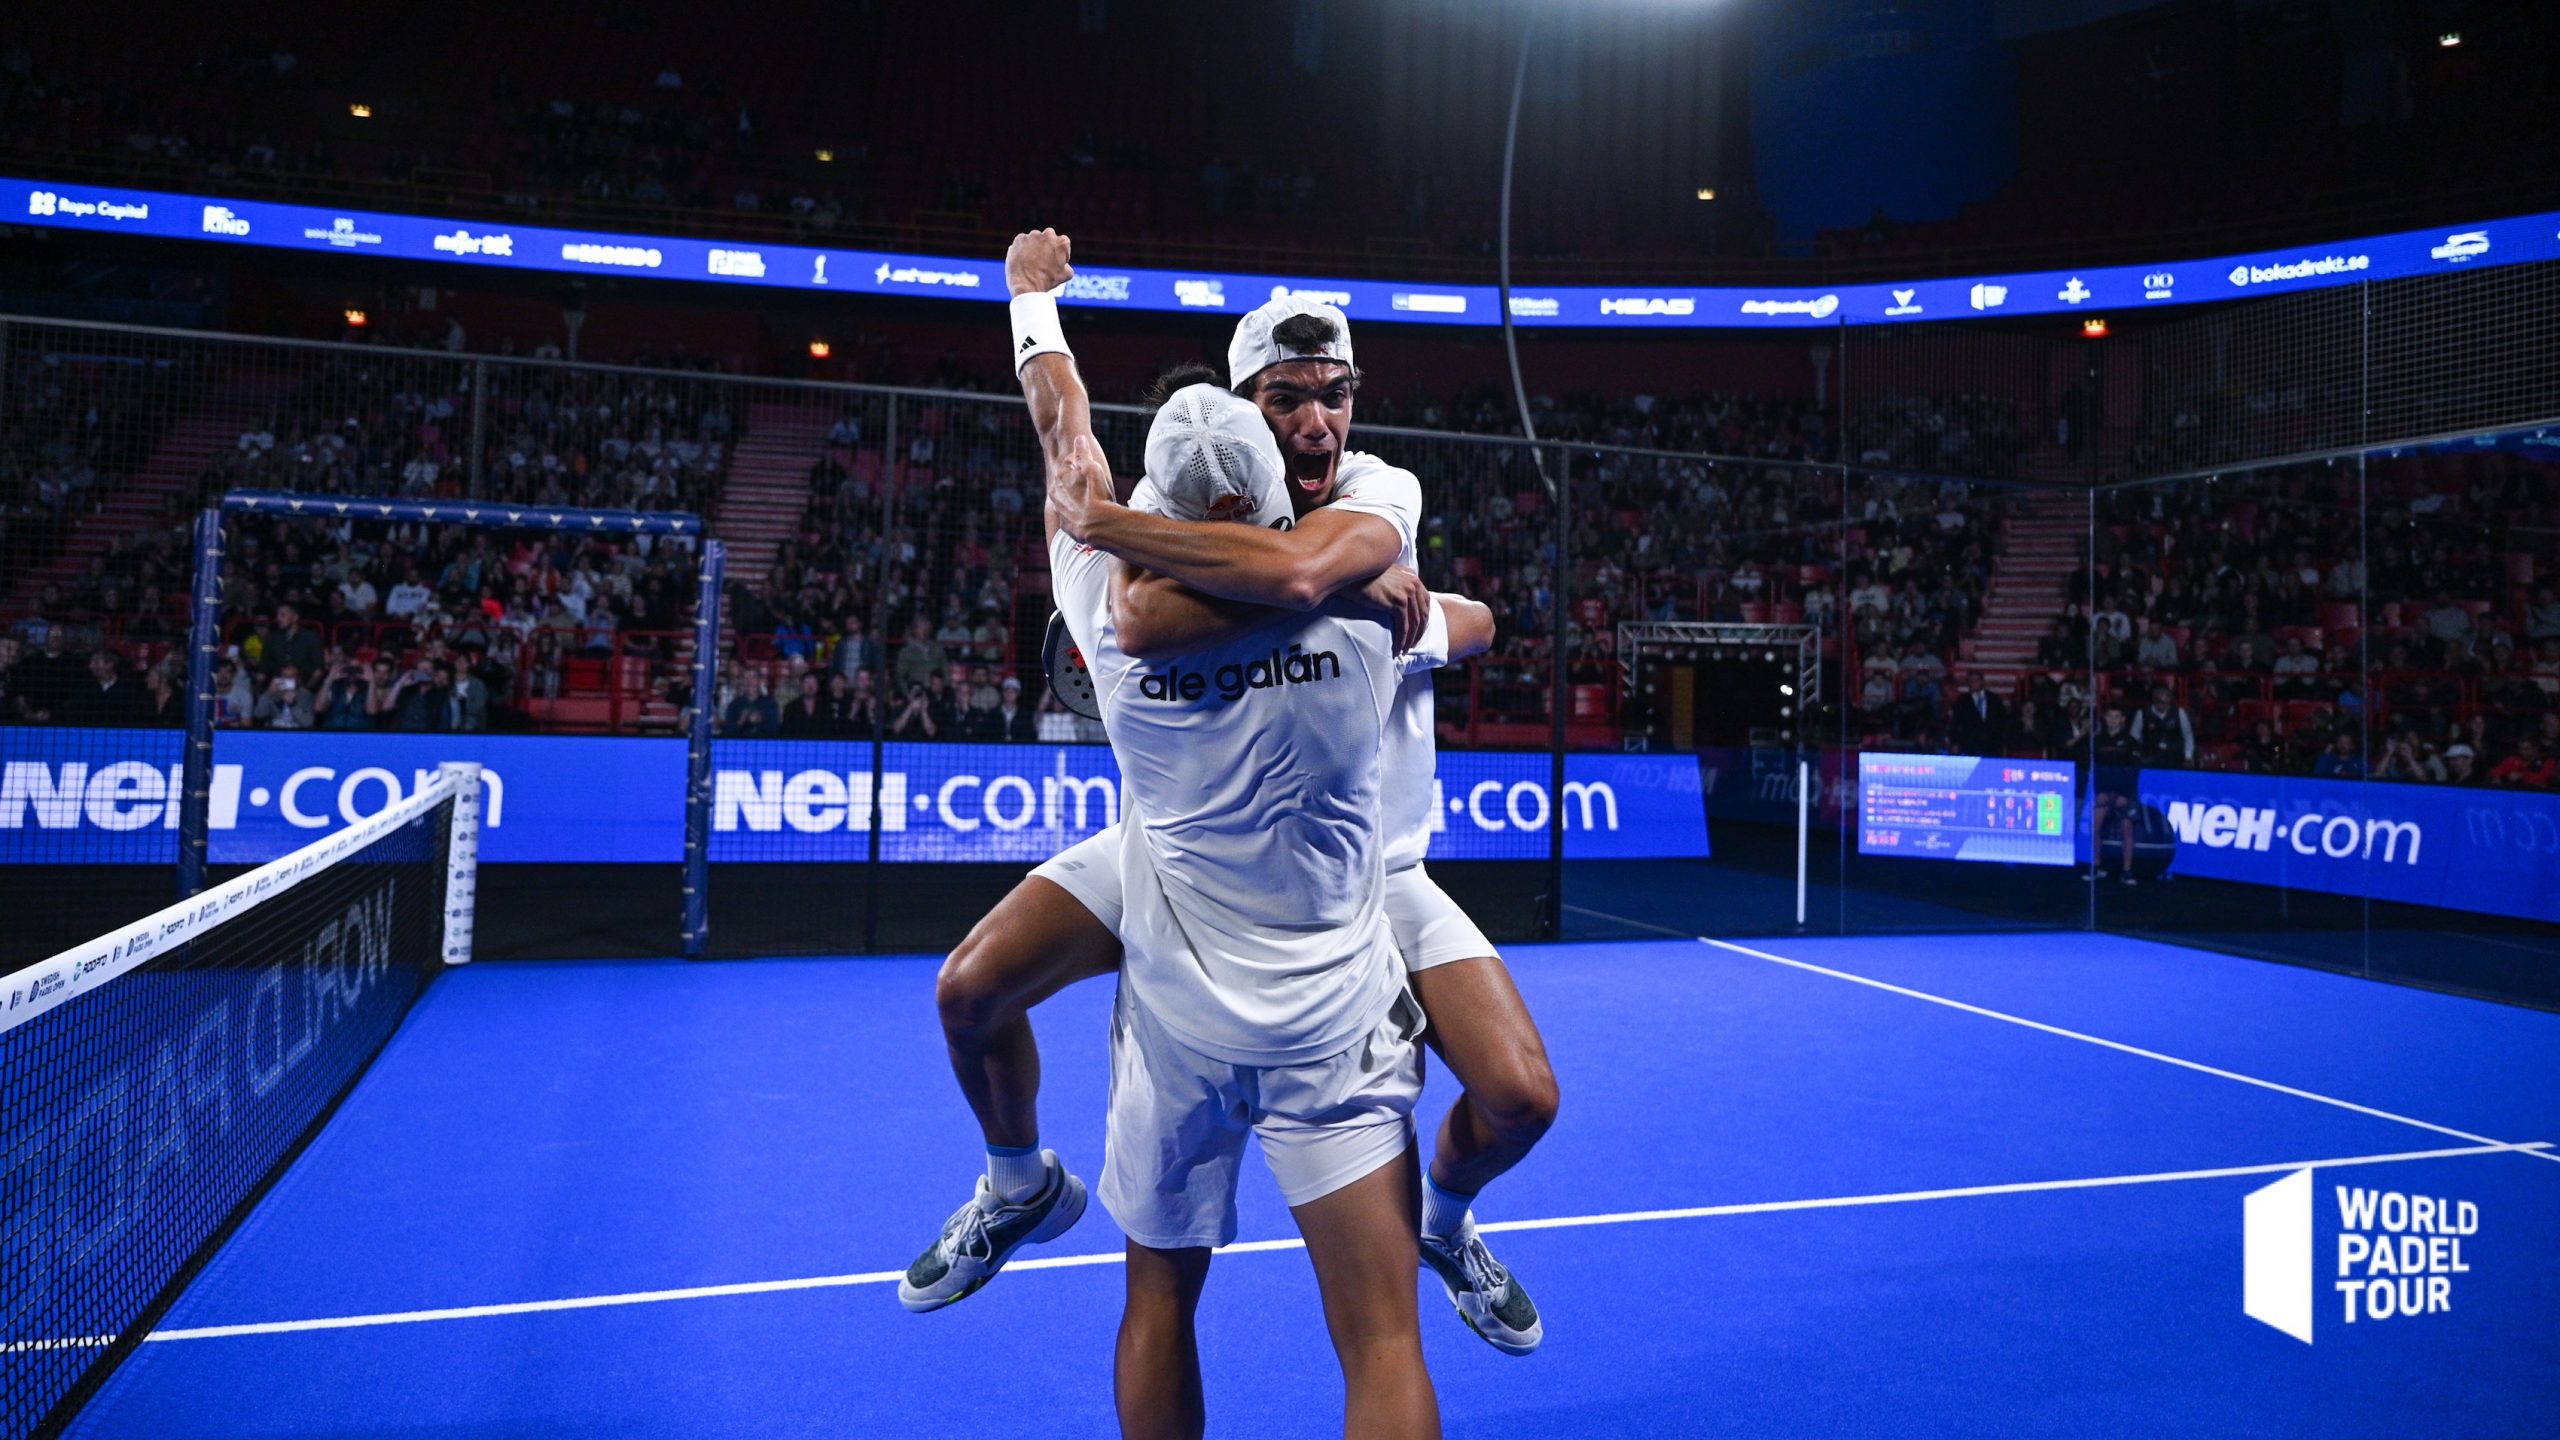 Lebrón and Galán come back from set down to win Swedish Padel Open 2022!